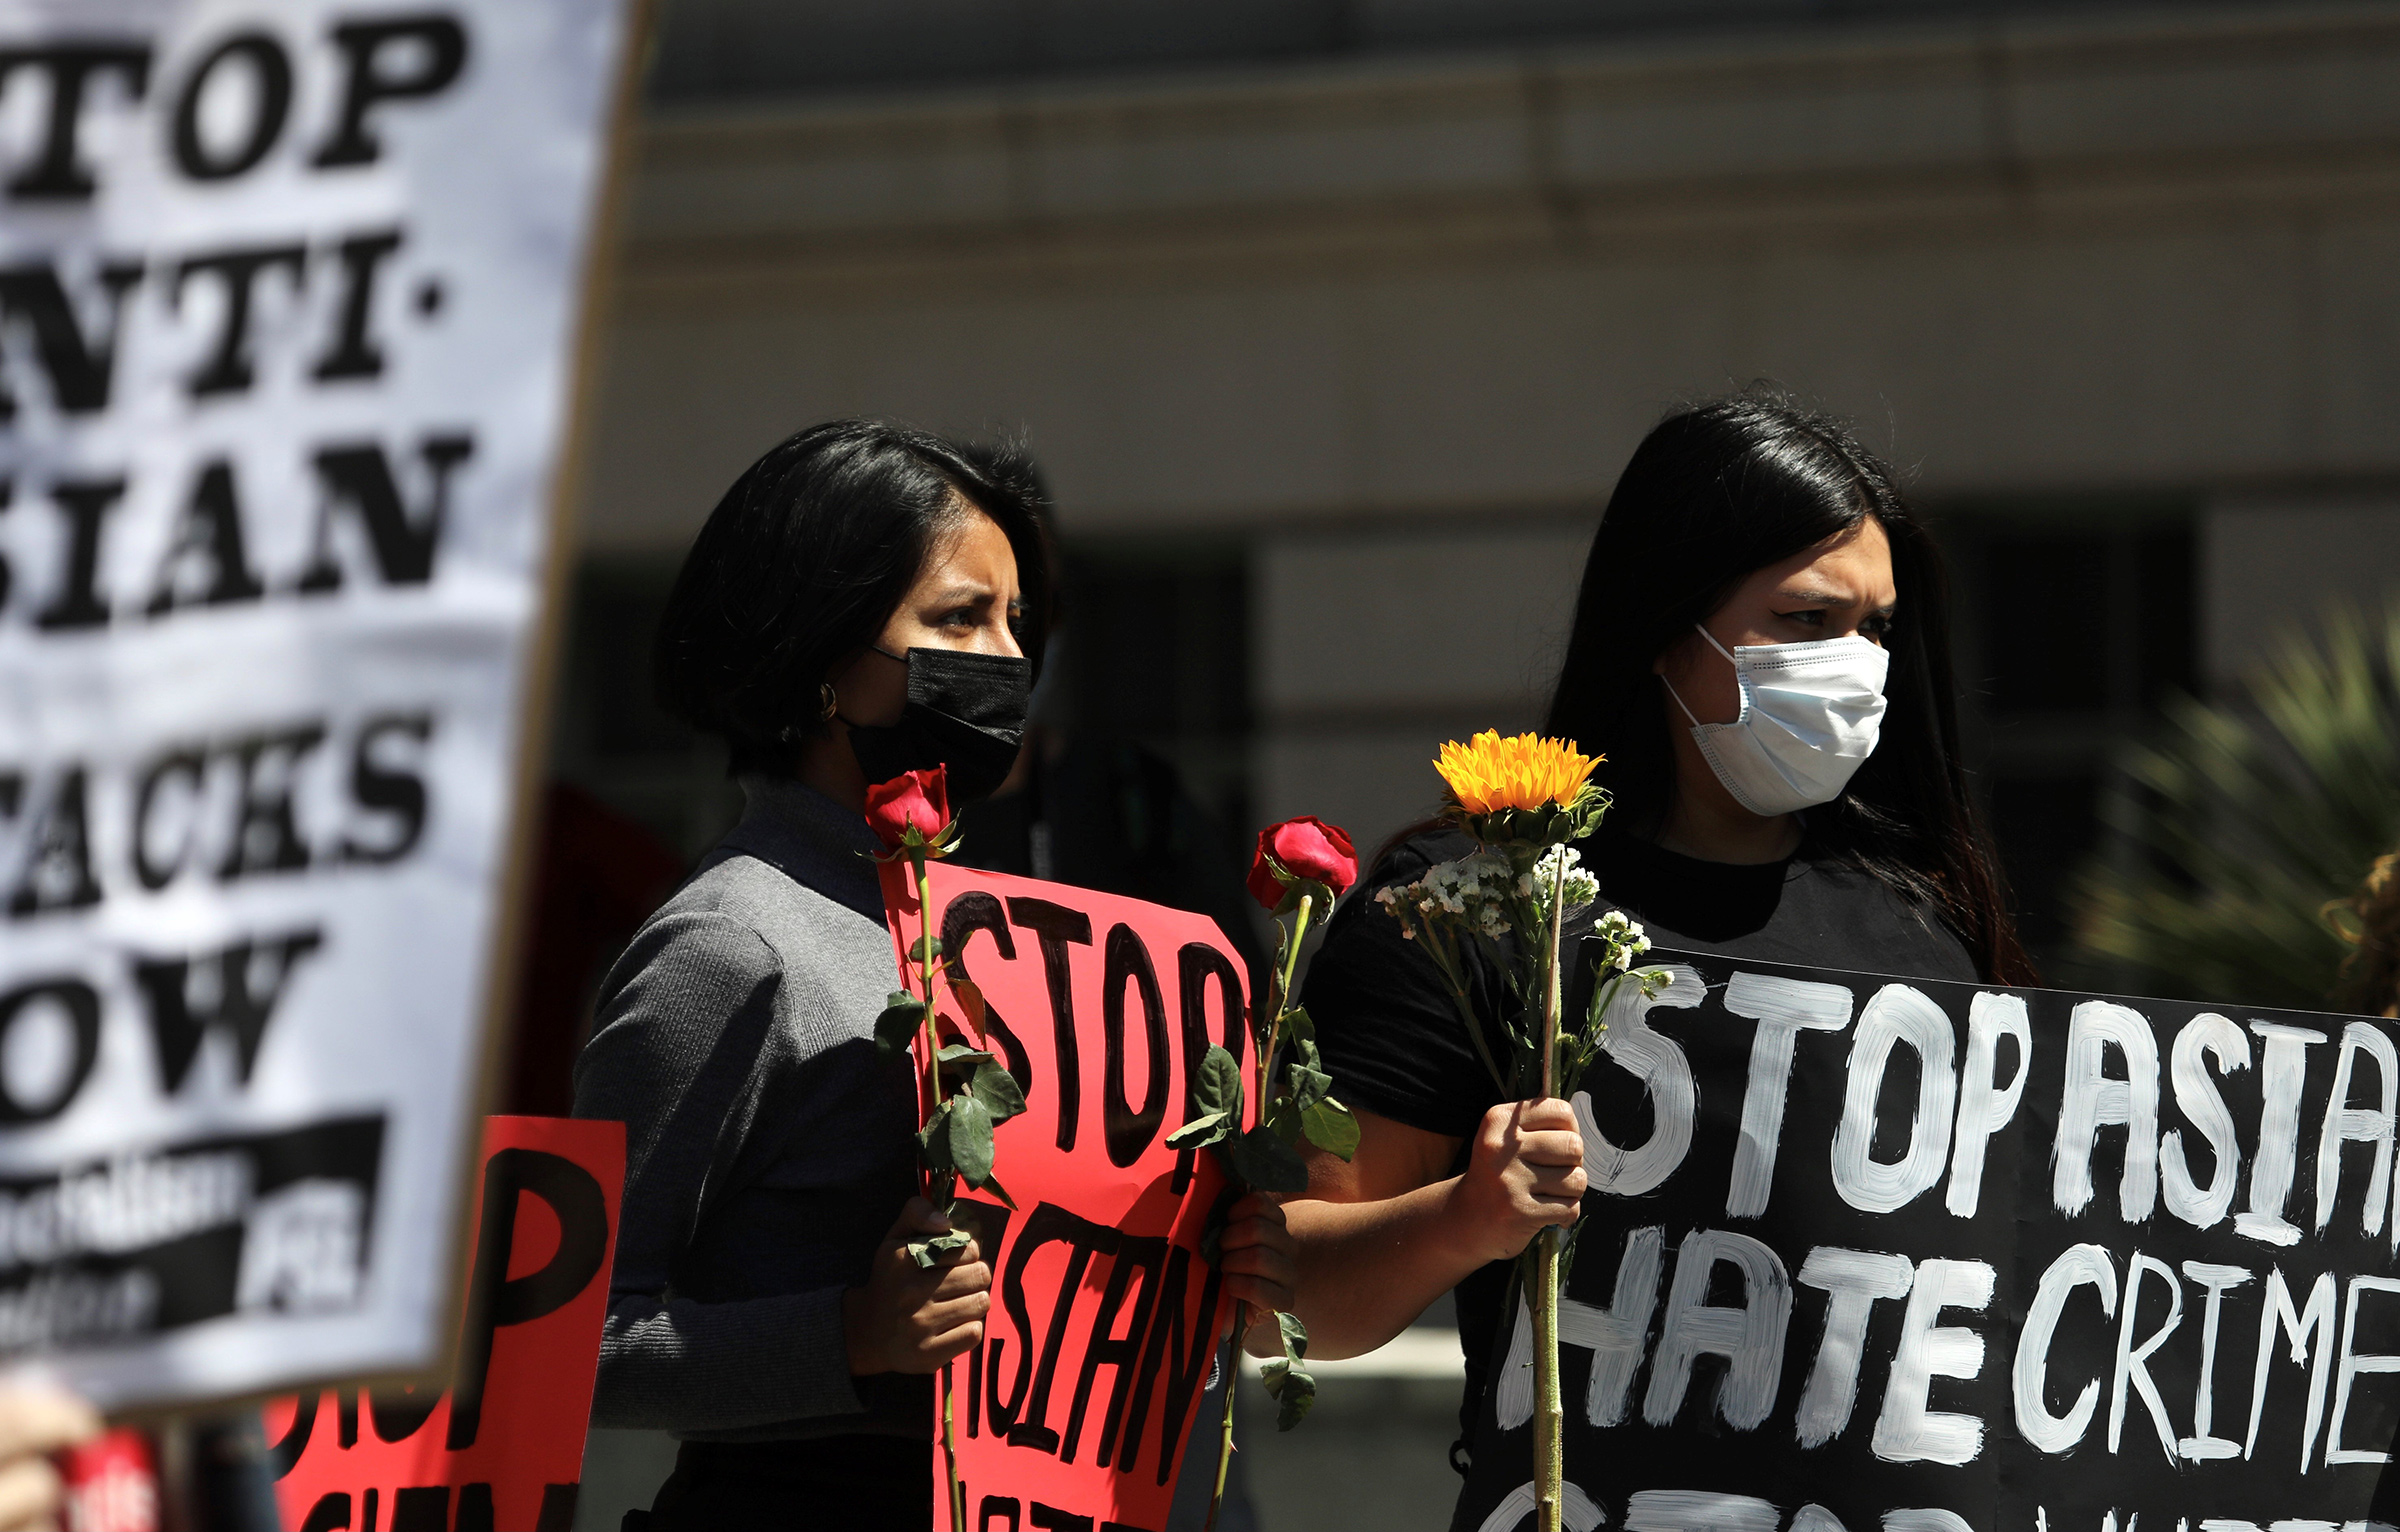 People participate in a Stop Asian Hate rally and march at City Hall in Los Angeles, on March 27, 2021. (Xinhua/Getty Images)